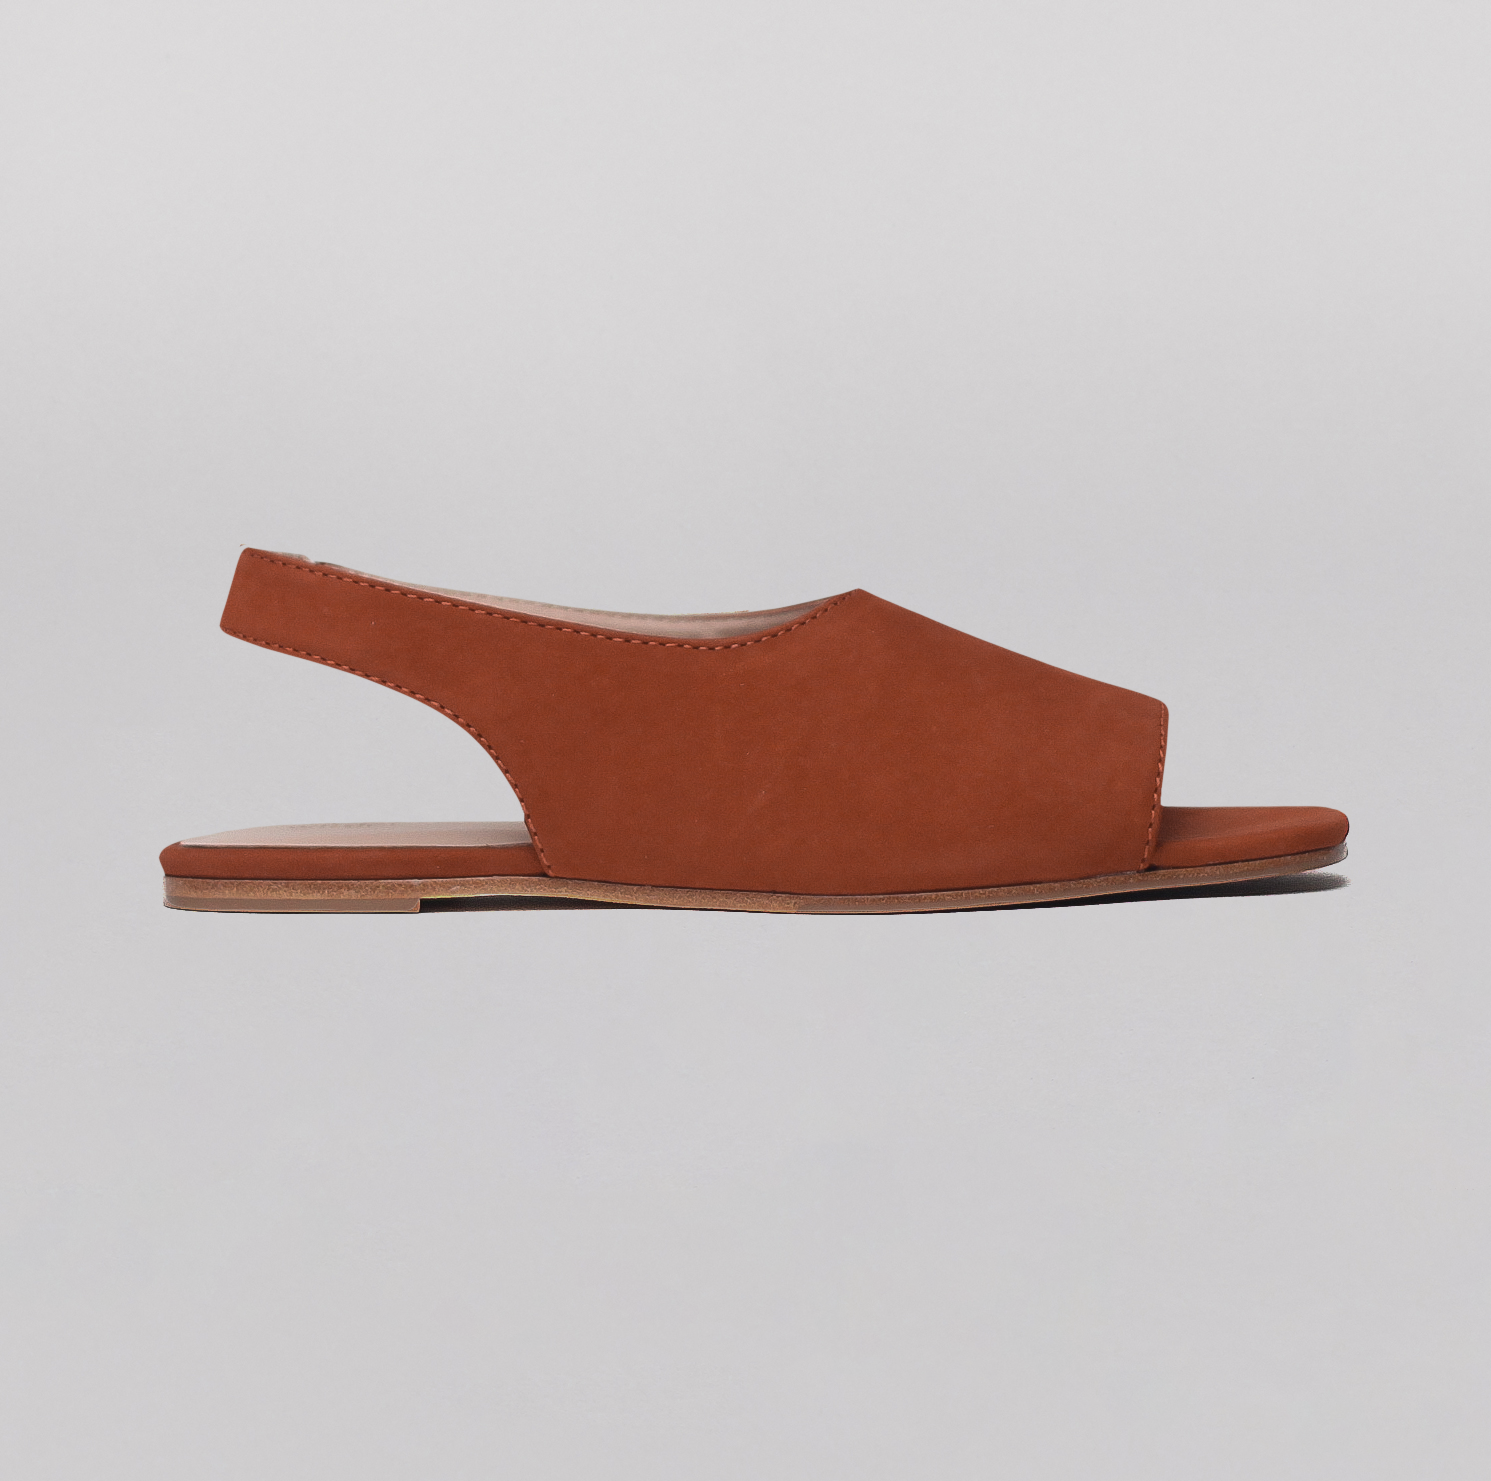 profile view of women's flat sandal in brown leather